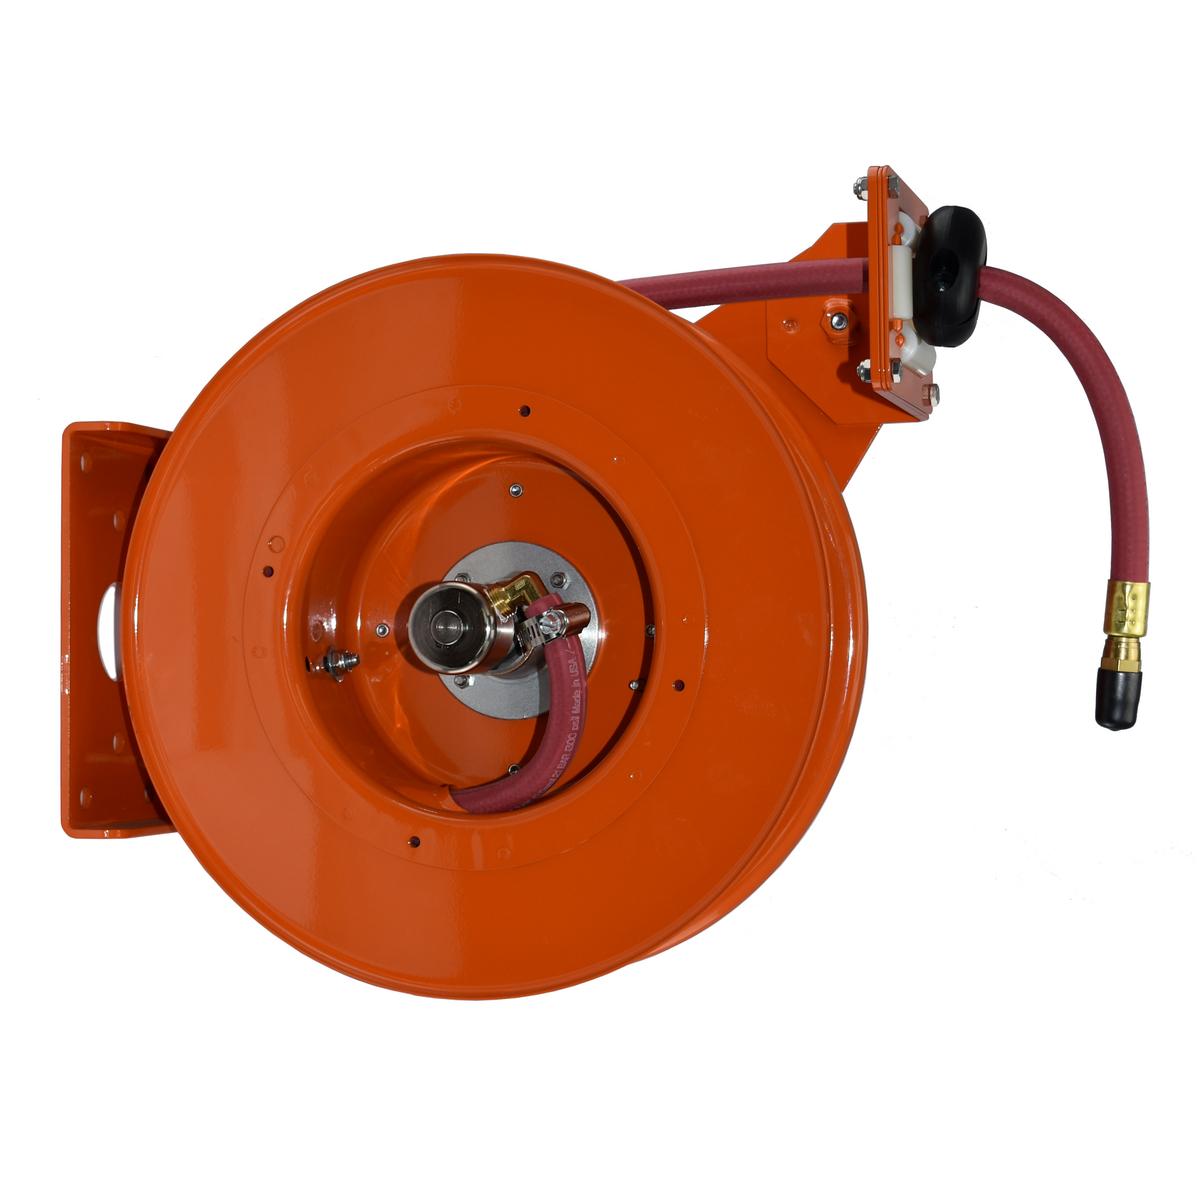 Hubbell HM142-8-P4 The Gleason Hose-Master hose reel is the most rugged single hose, general purpose hose reel of its size in the industry. We created it with the most demanding hose reeling applications in mind, hand pull or machine mounted. Oversized bearings and a heavy 